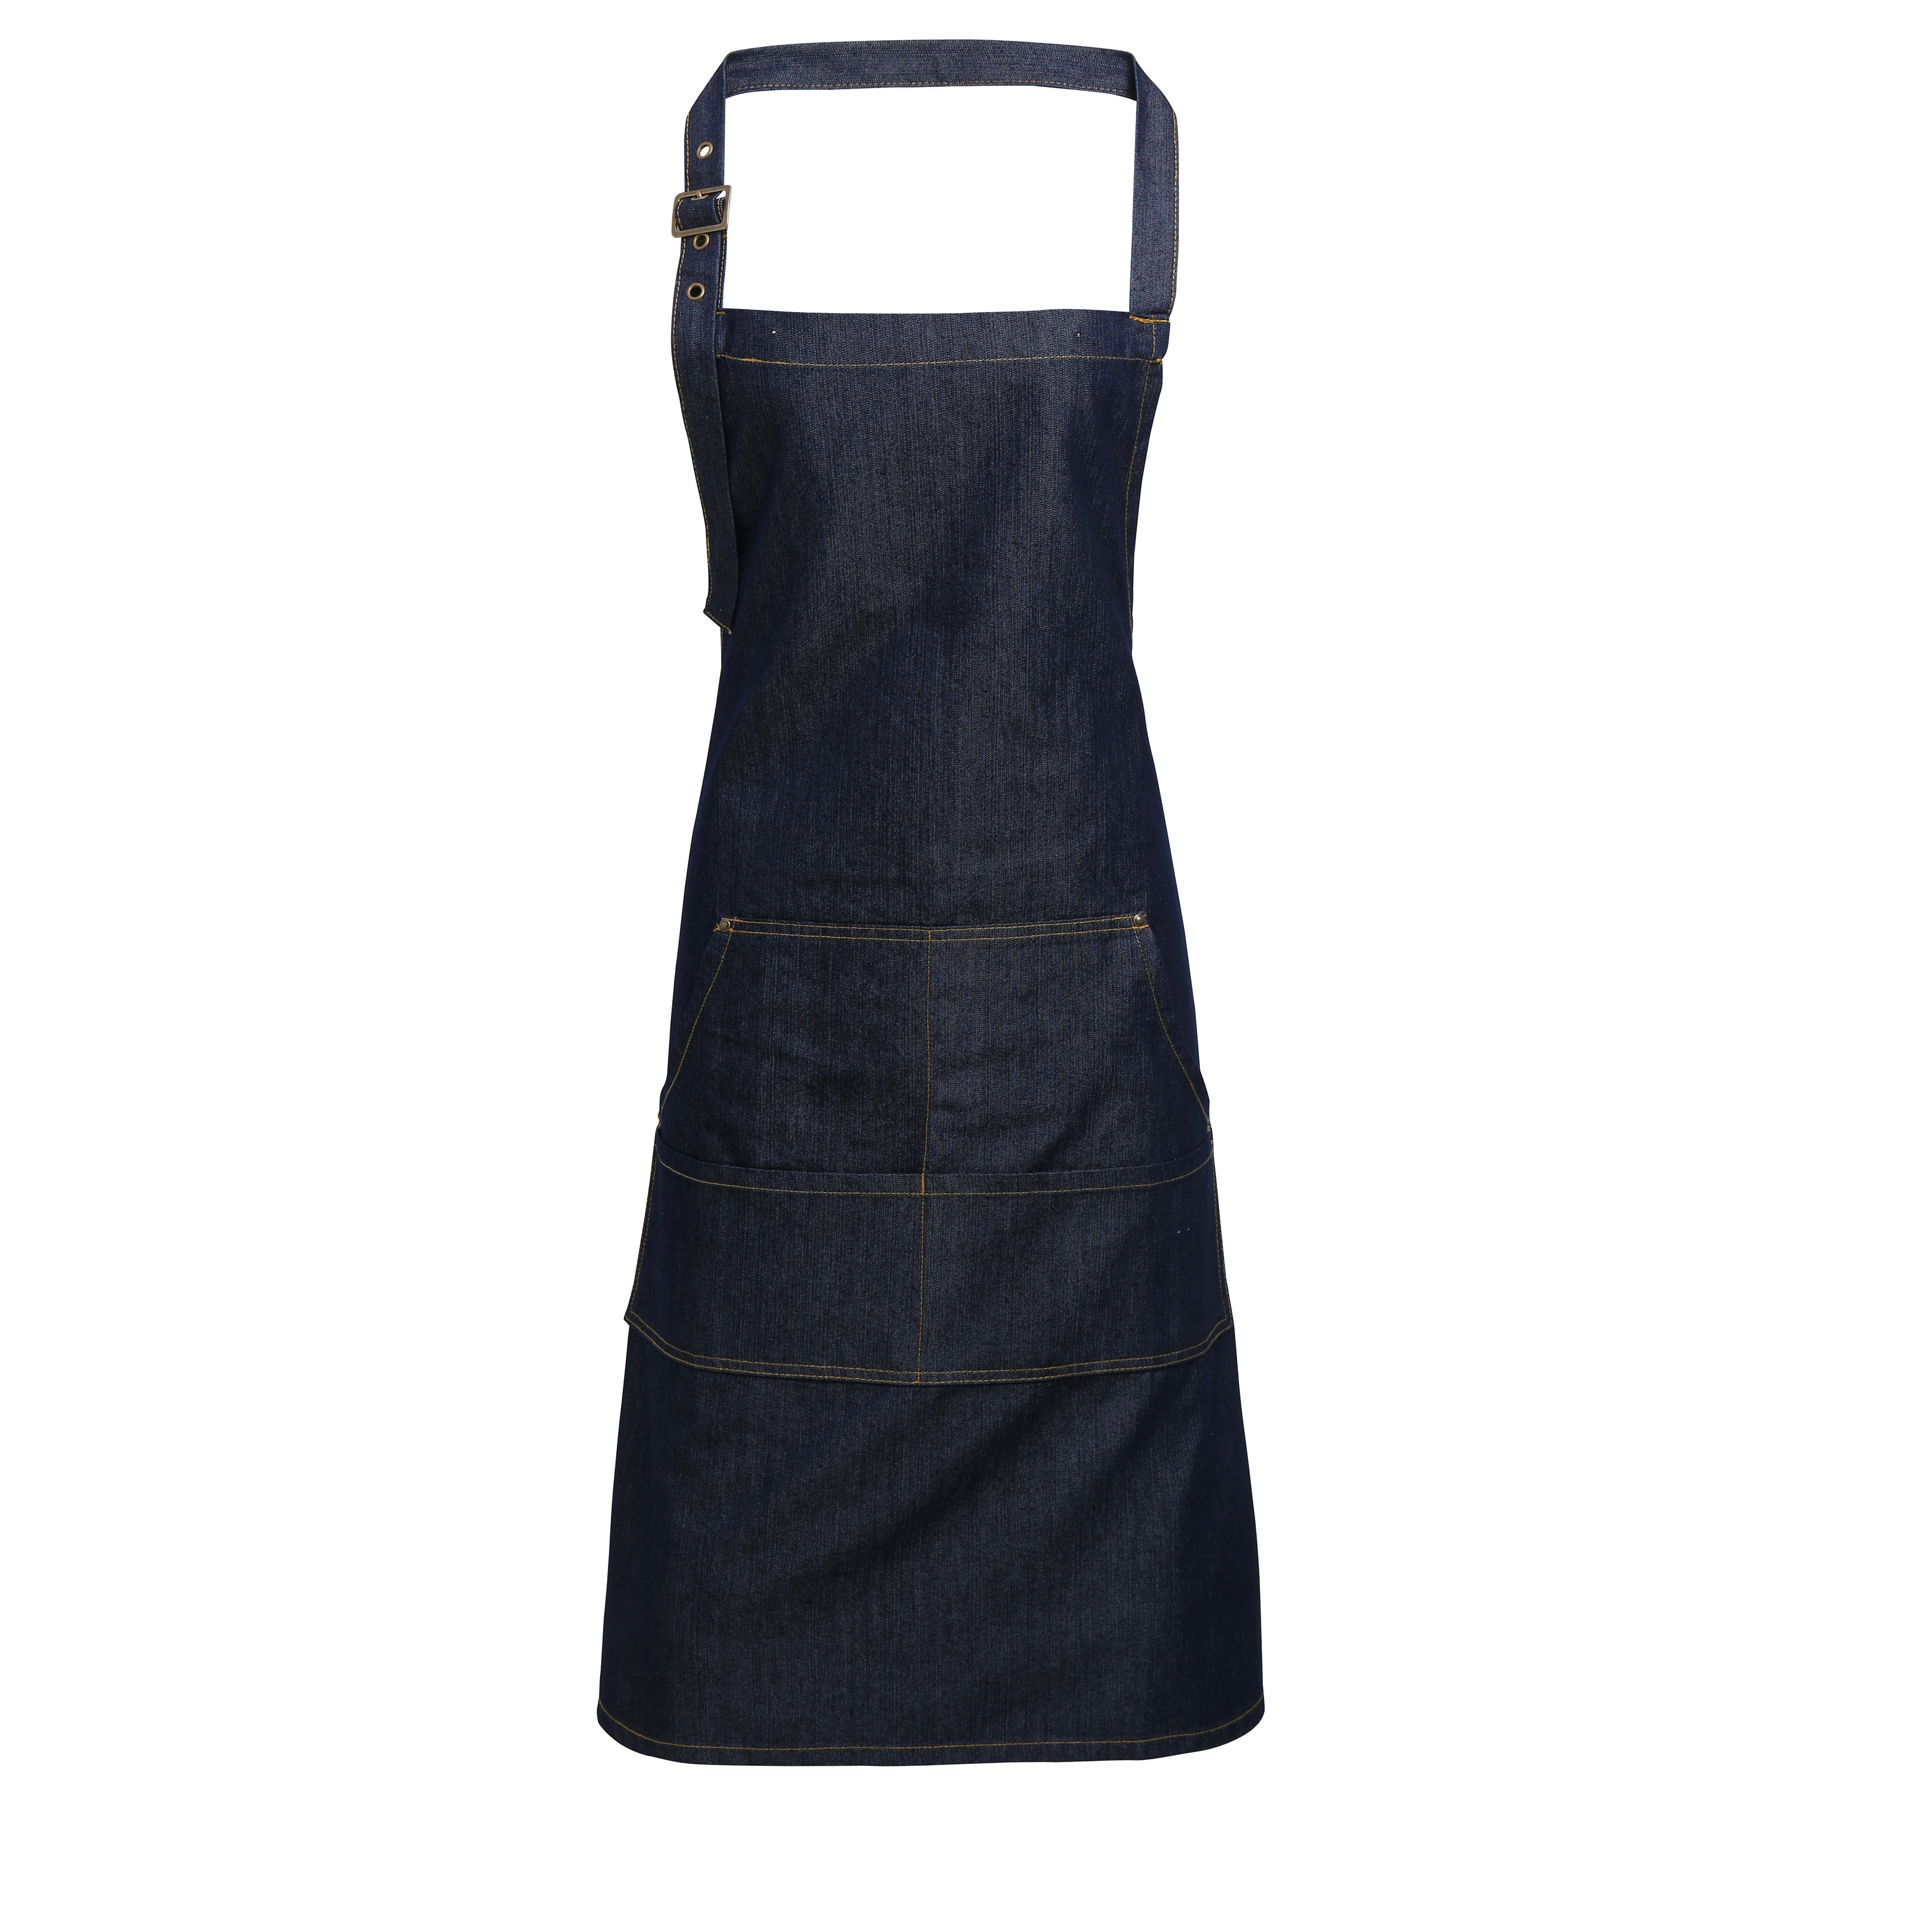 Jean Bib Apron in navy with contrasting stitching, 4 pocket compartments and adjustable buckle on neckband